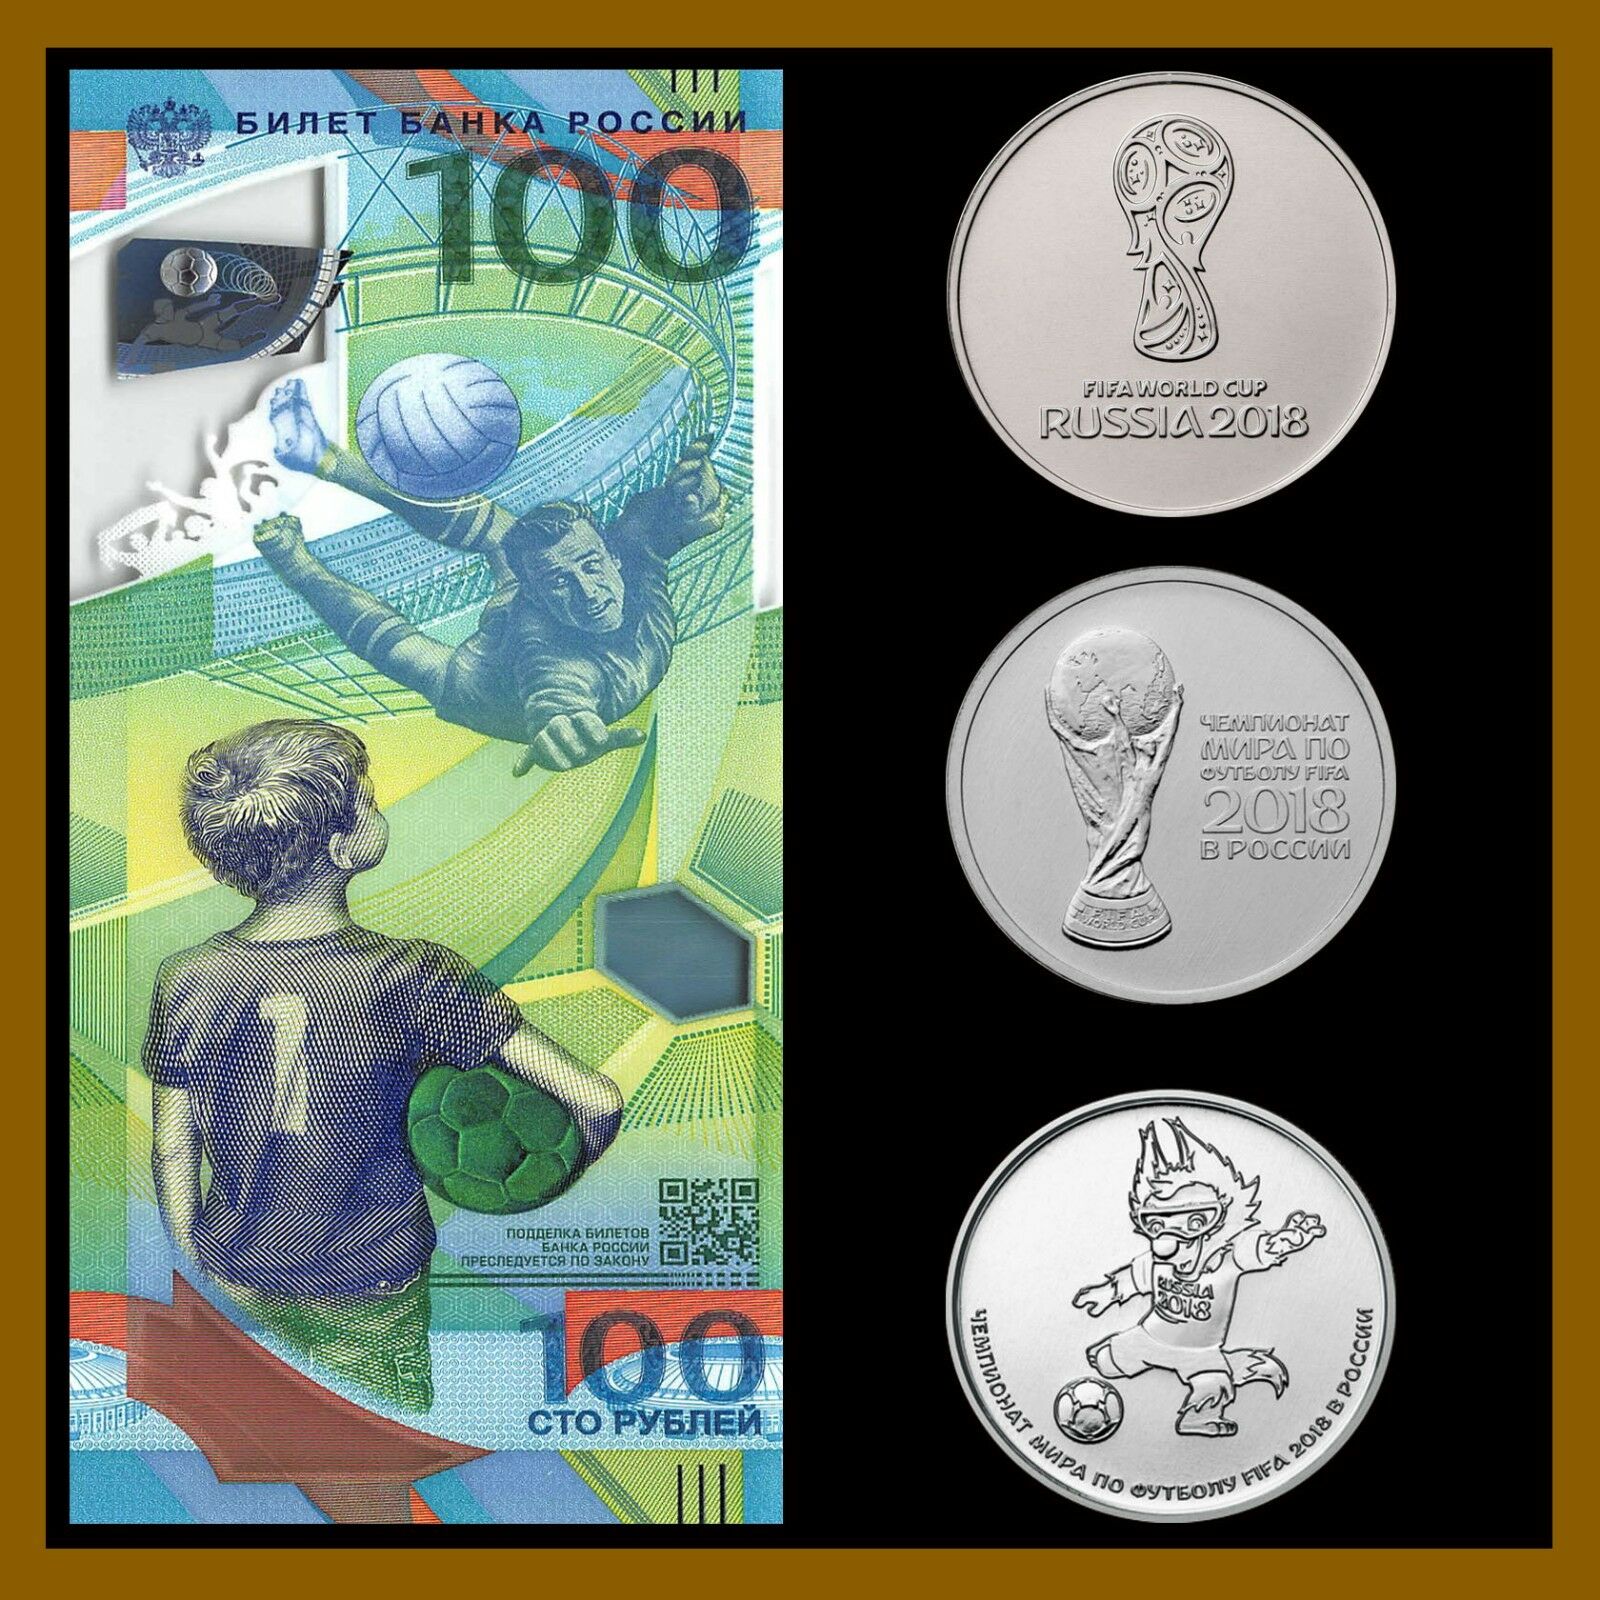 Russia 100 Rubles + 3 Full Coin Set, 2018 Fifa World Cup Soccer Football